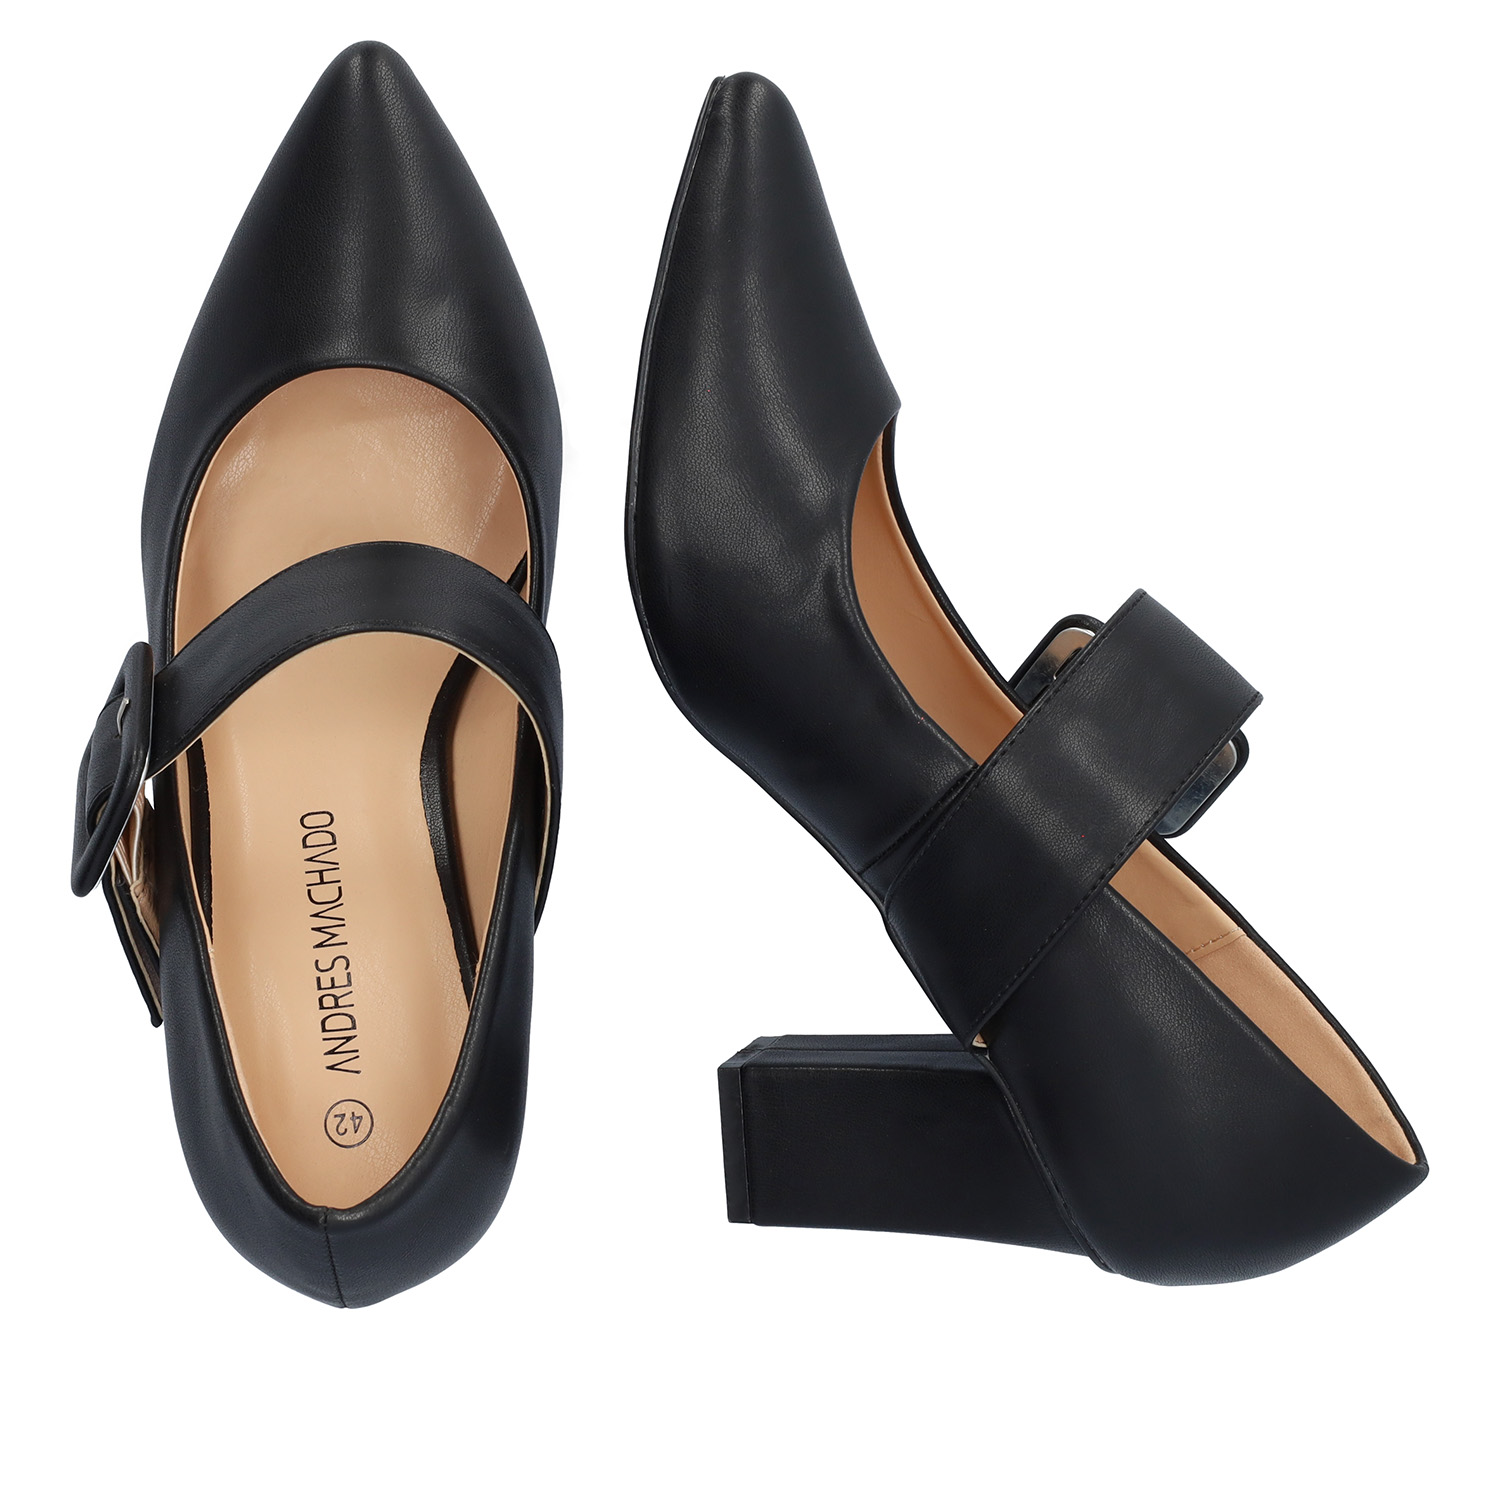 Classic pumps in black faux leather 